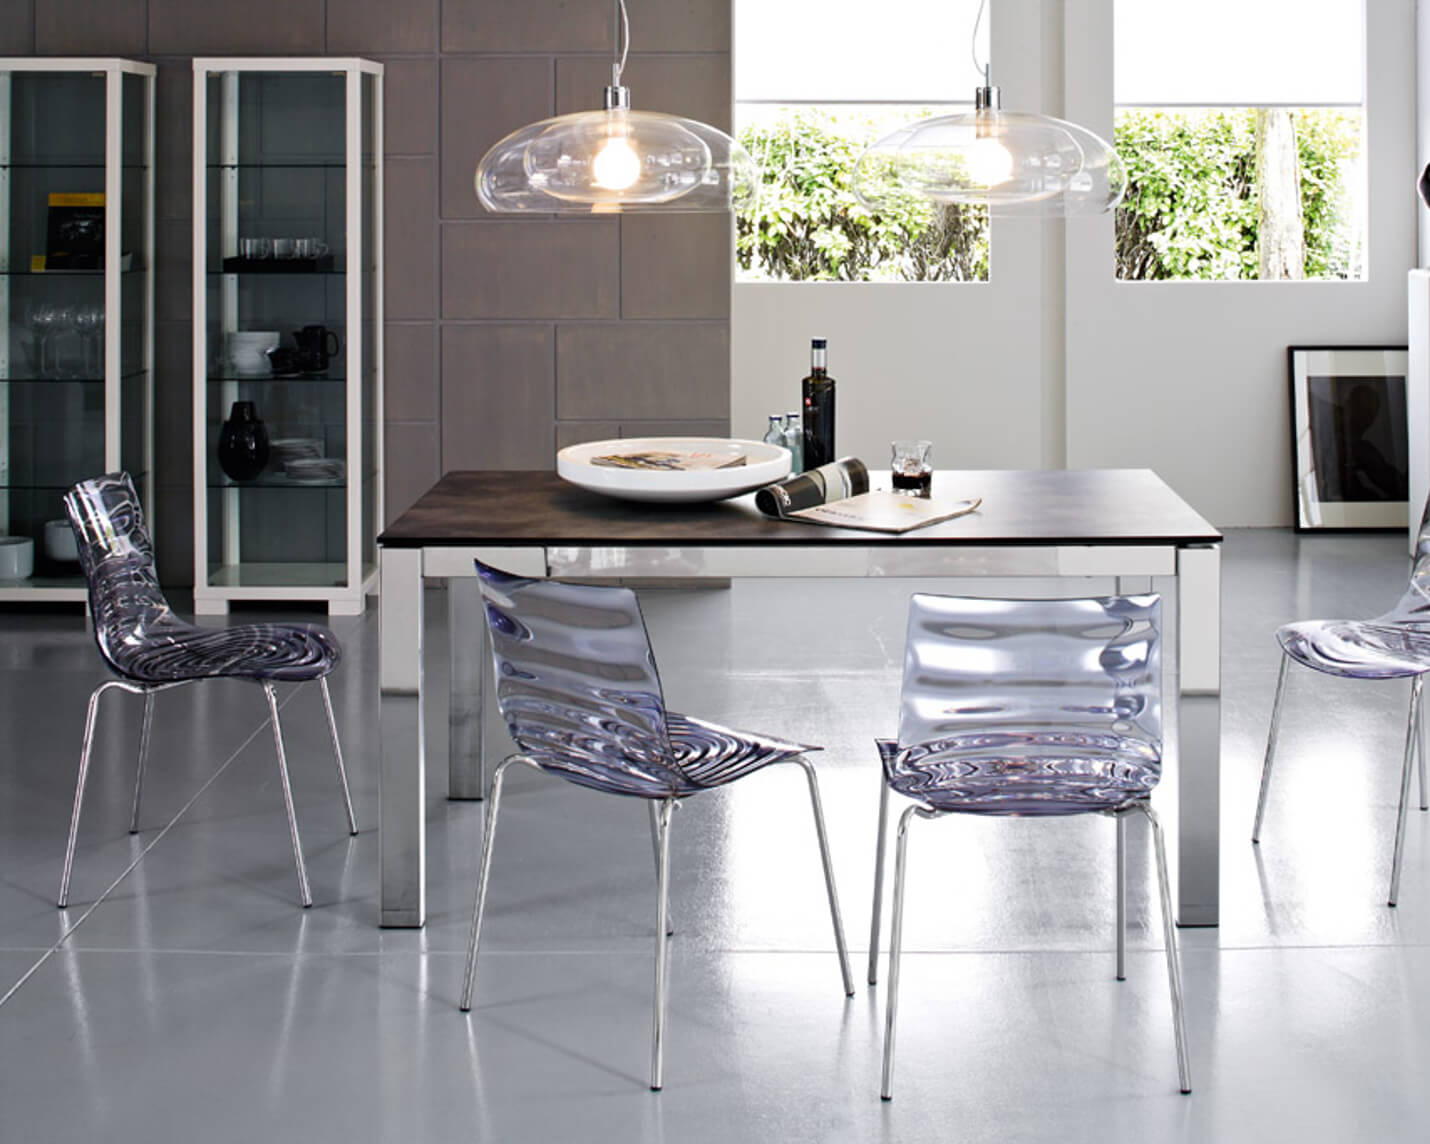 dining group for the kitchen glass chairs